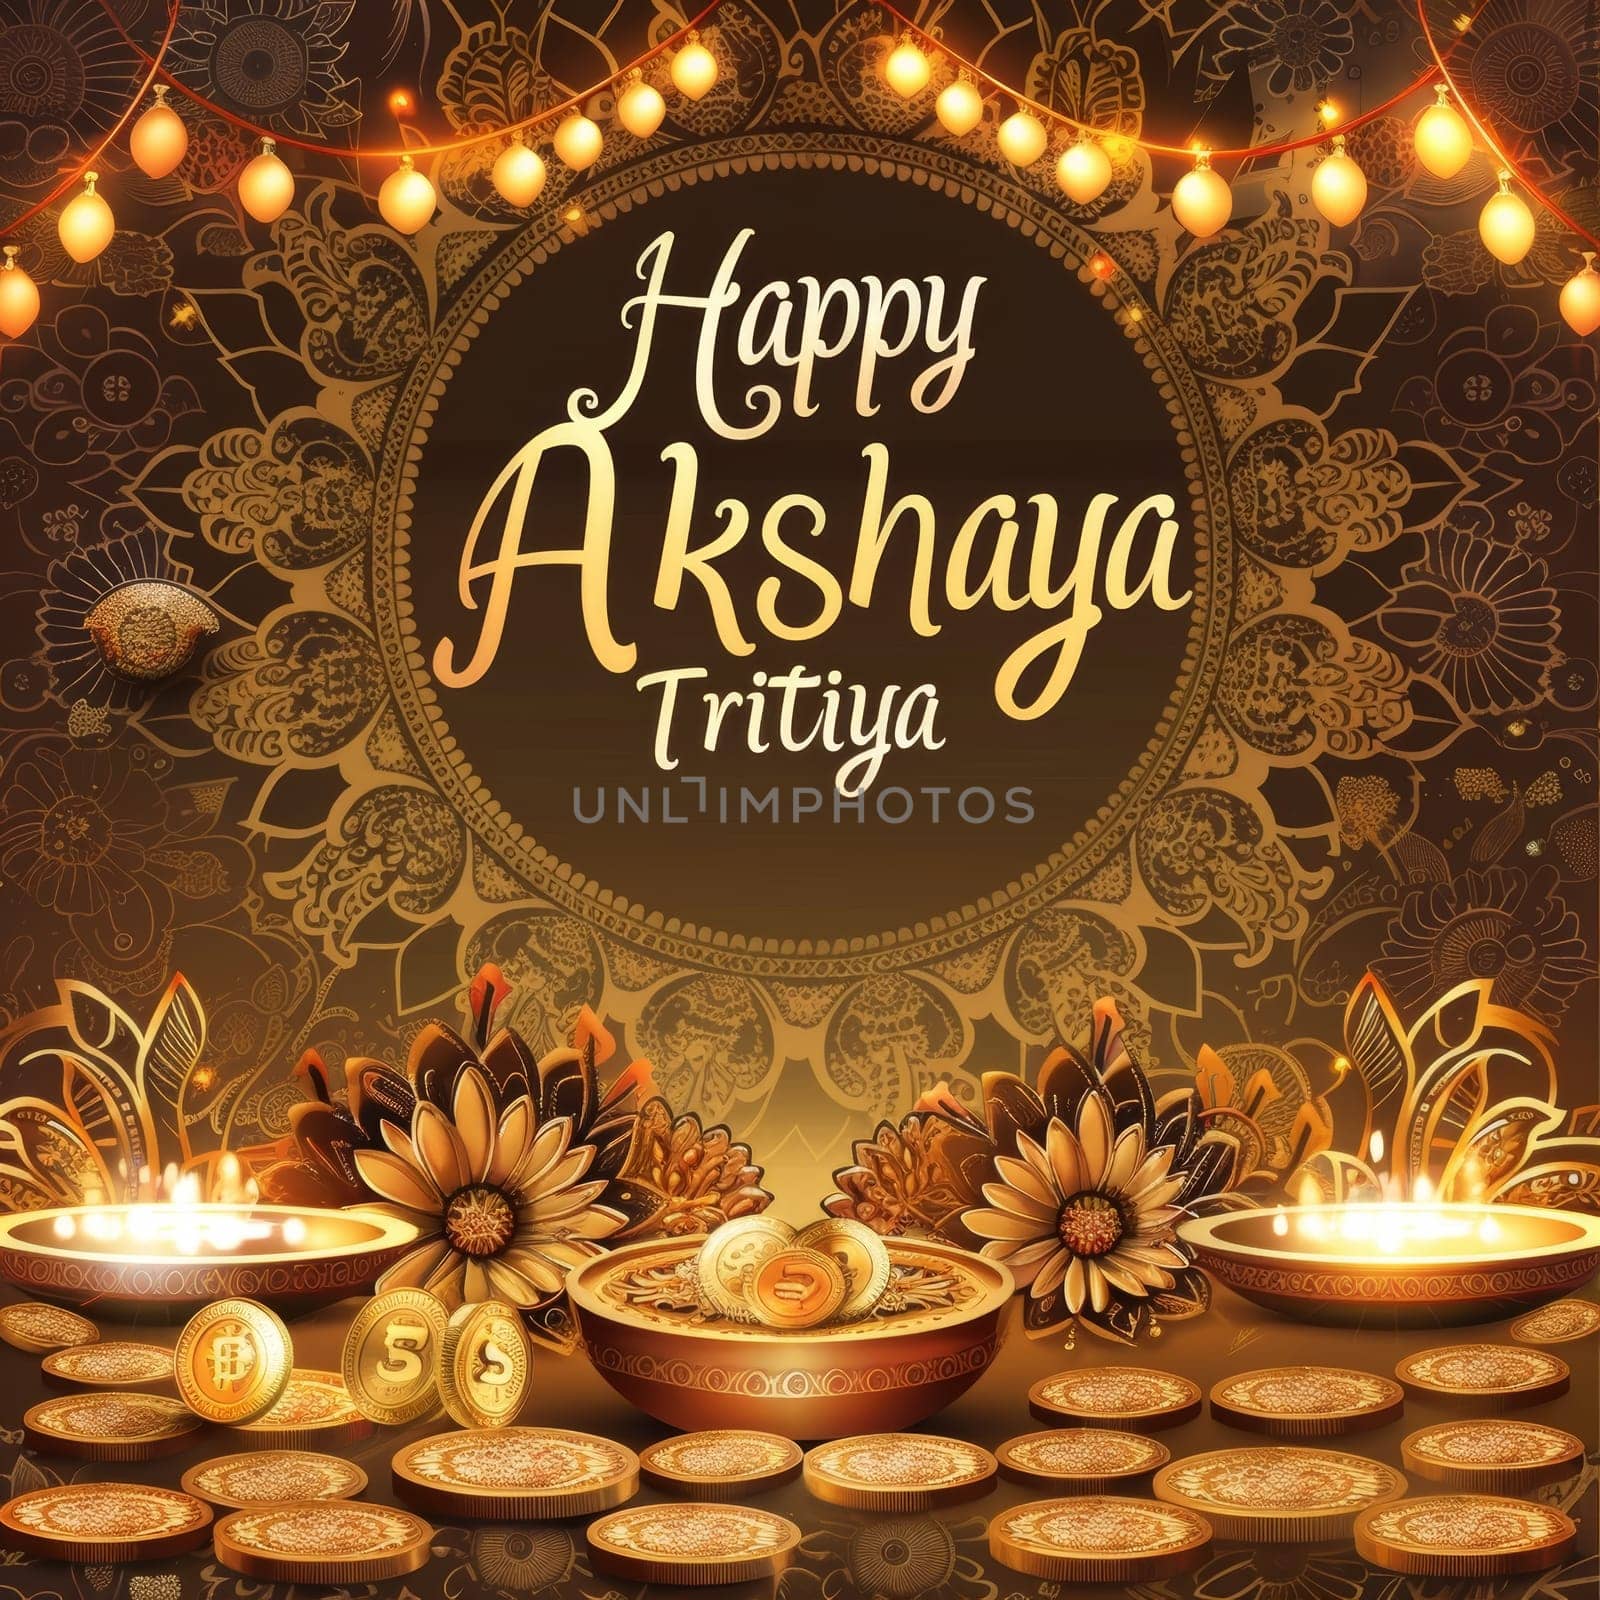 A richly decorated Akshaya Tritiya greeting featuring traditional Indian diyas, florals, and gold coins symbolizing prosperity and luck. by sfinks